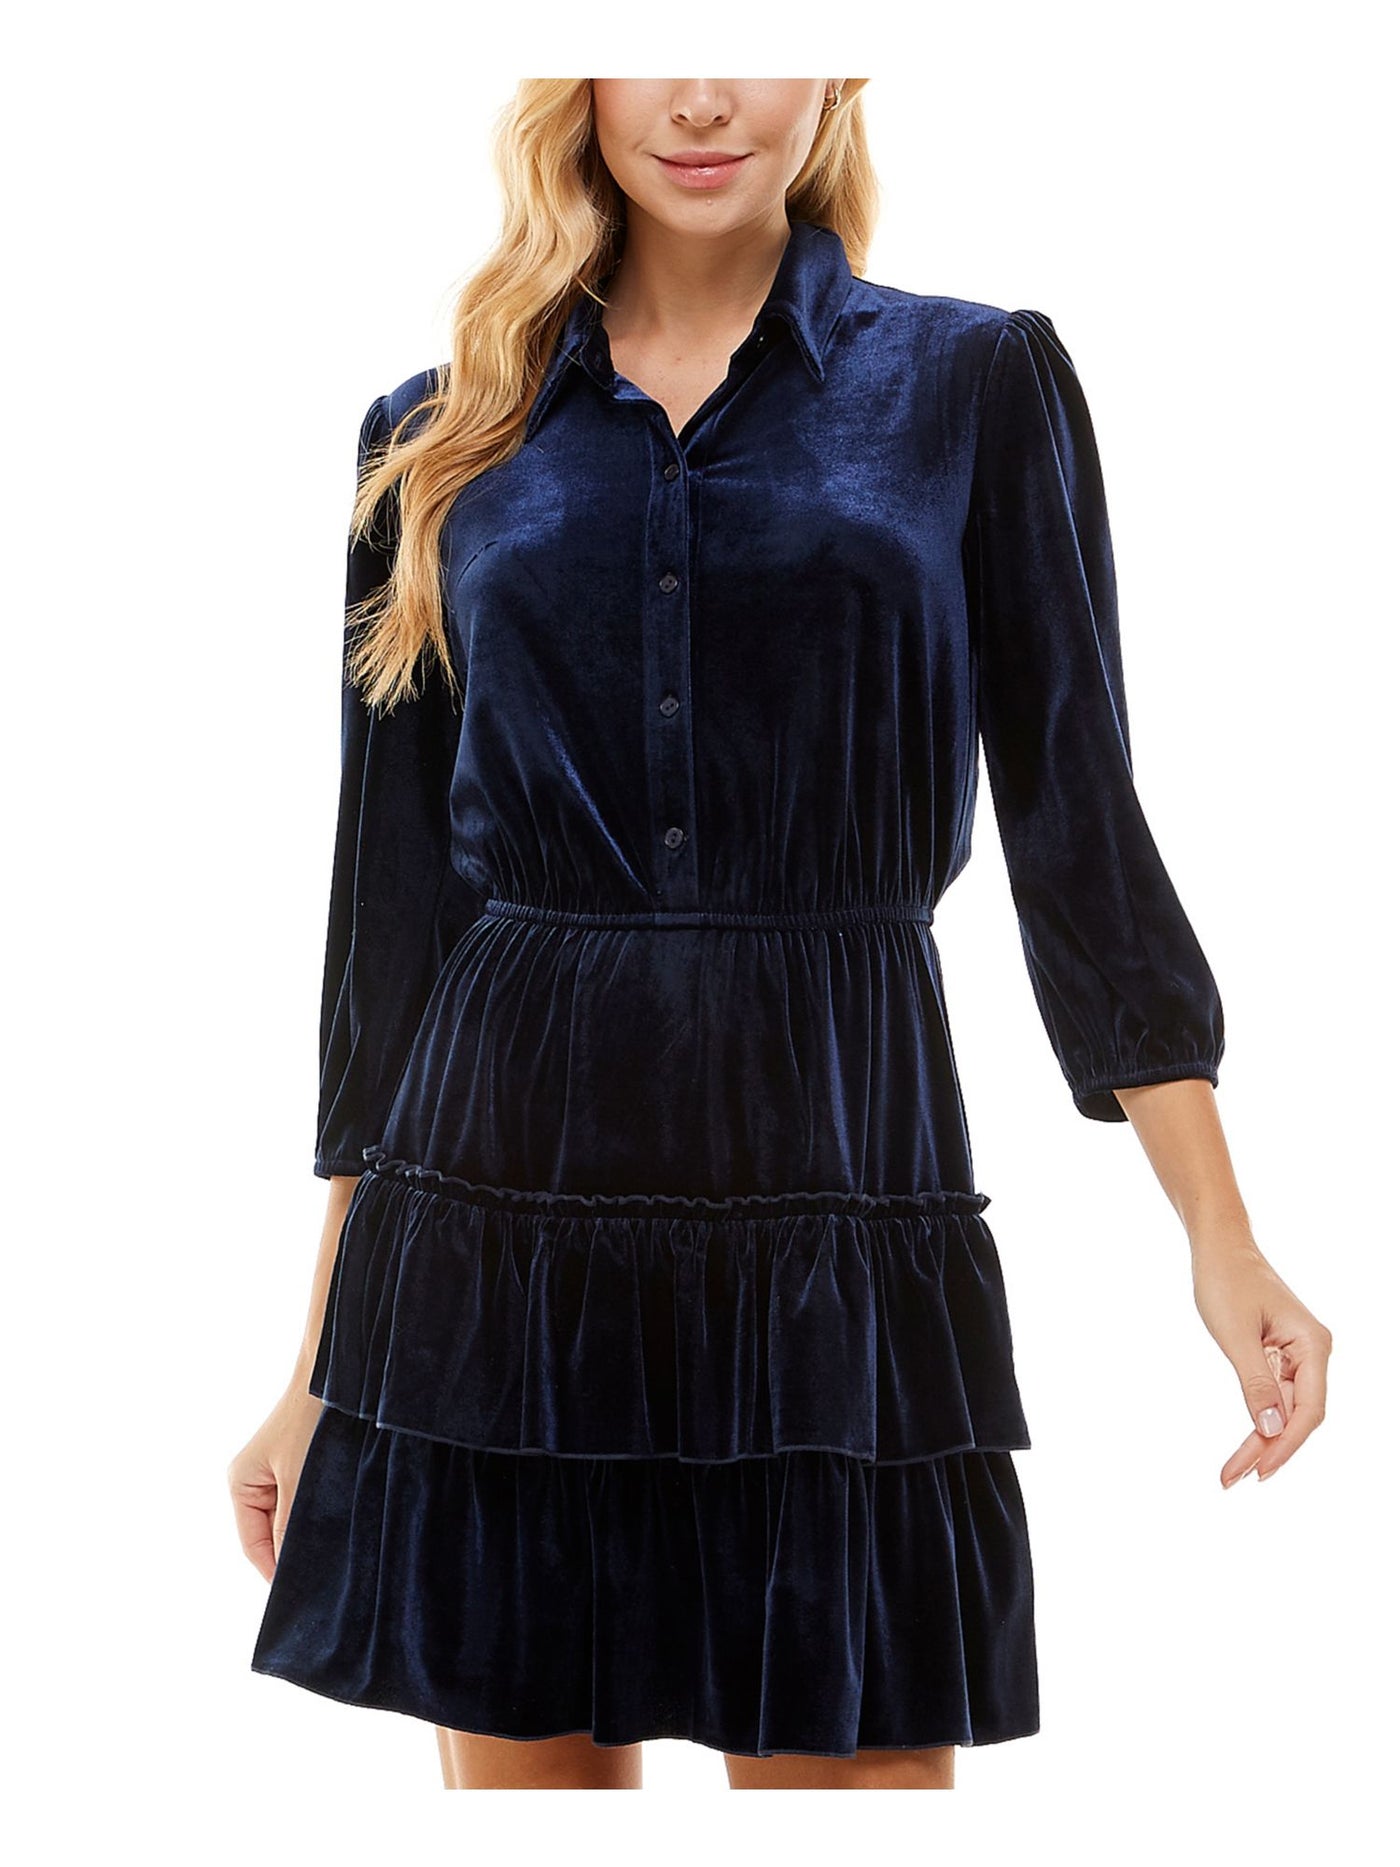 CITY STUDIO Womens Navy 3/4 Sleeve Point Collar Above The Knee Fit + Flare Dress Juniors XS